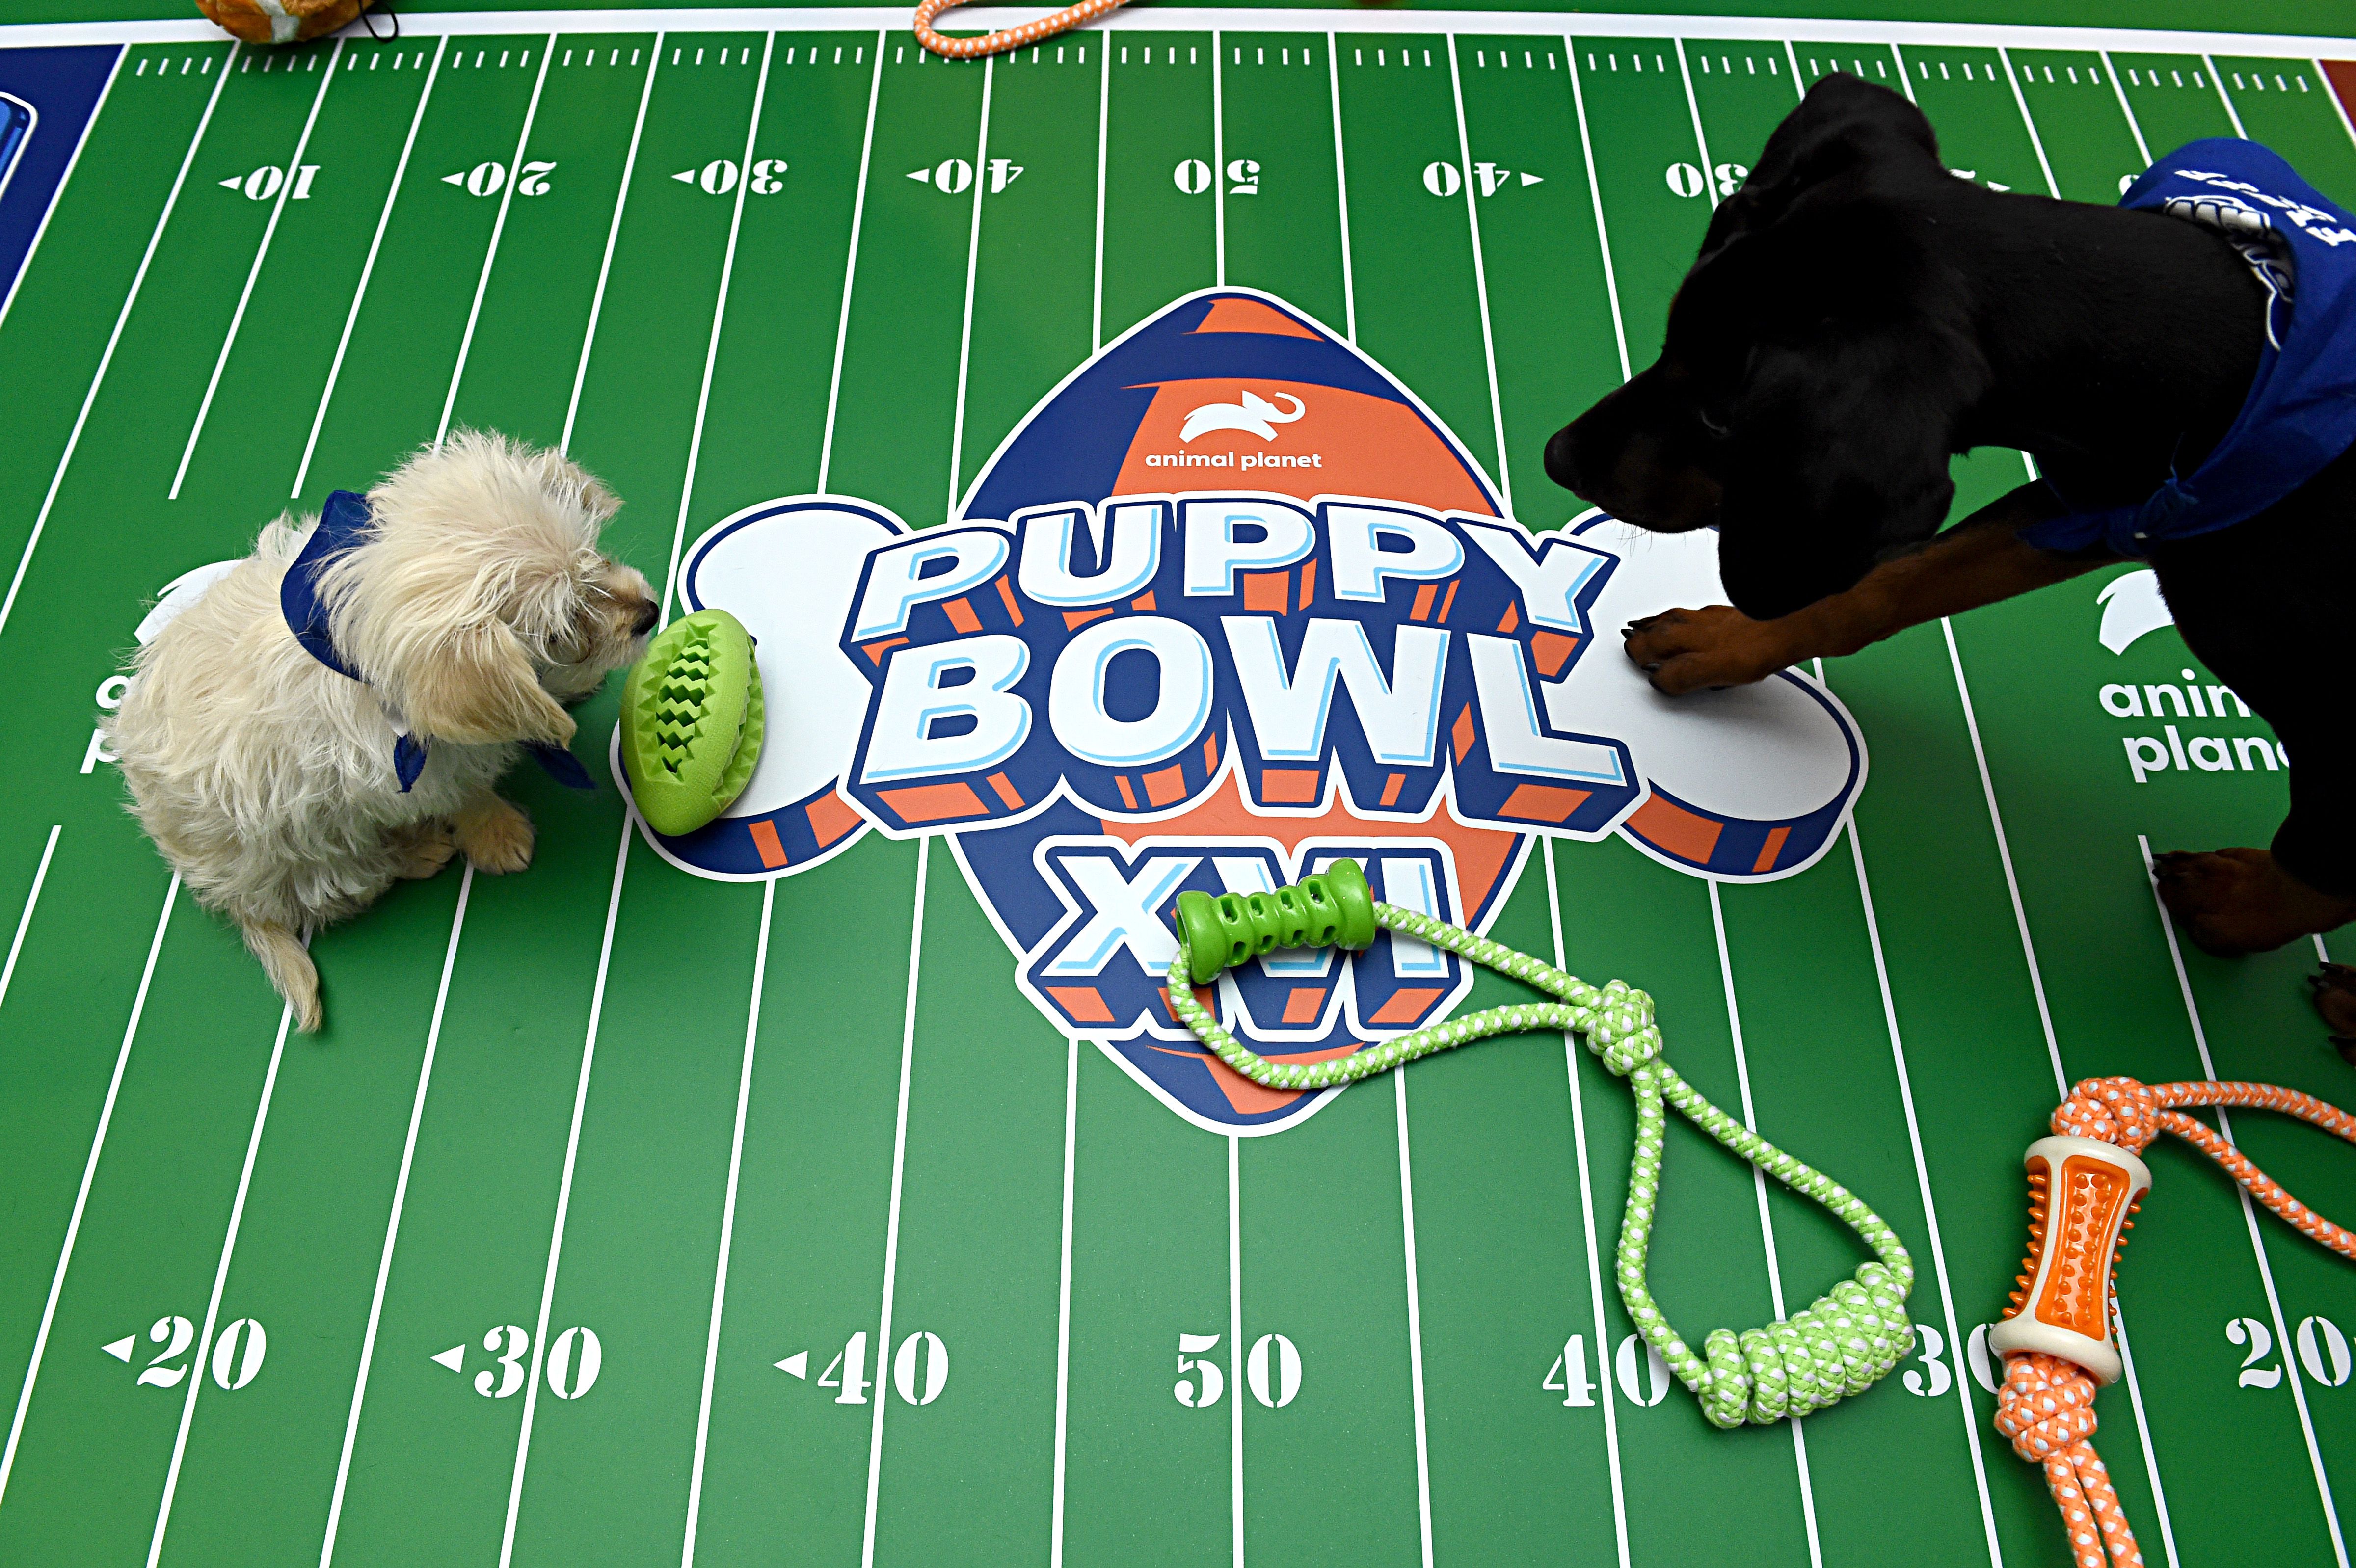 Puppy Bowl 2021: Live stream, start time, TV channel, full list of dogs,  how to watch Martha Stewart, Snoop Dogg host (Sun., Feb 7) 